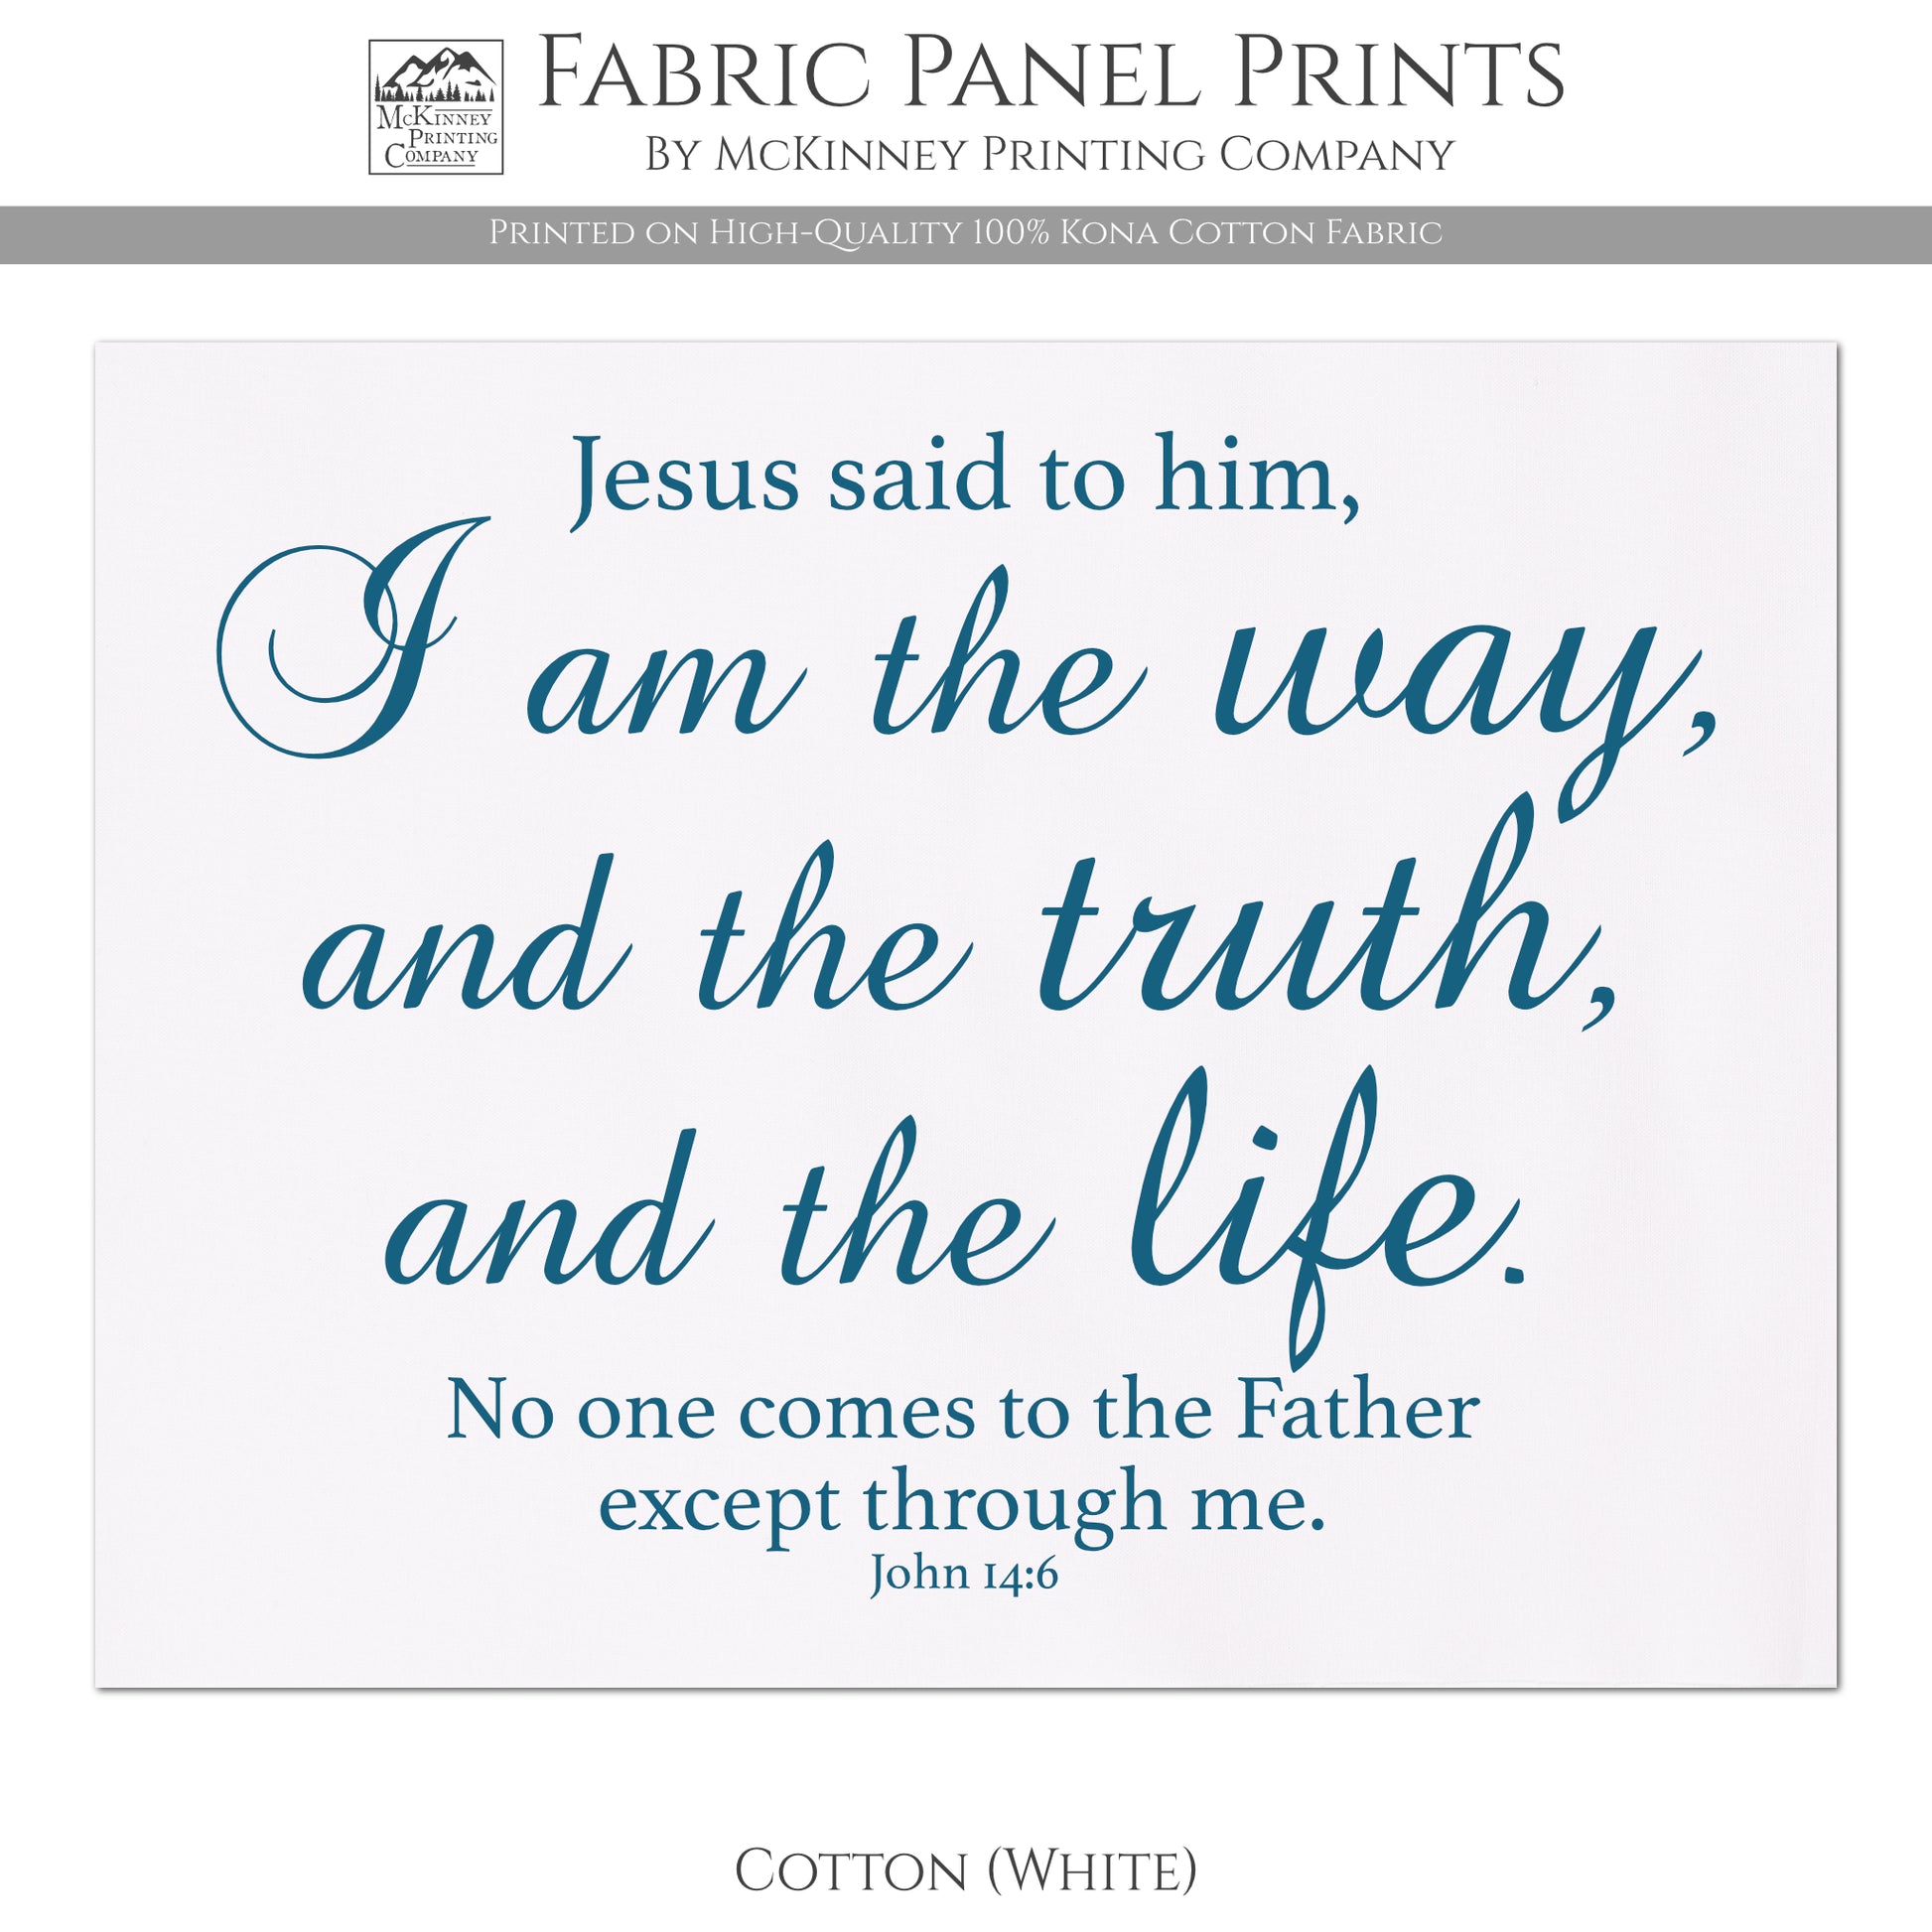 Jesus said to him, I am the way and the truth and the life. No one comes to the Father except through me. - John 14 6 - Fabric Panel Print, Quilt Block - Kona Cotton Fabric, White